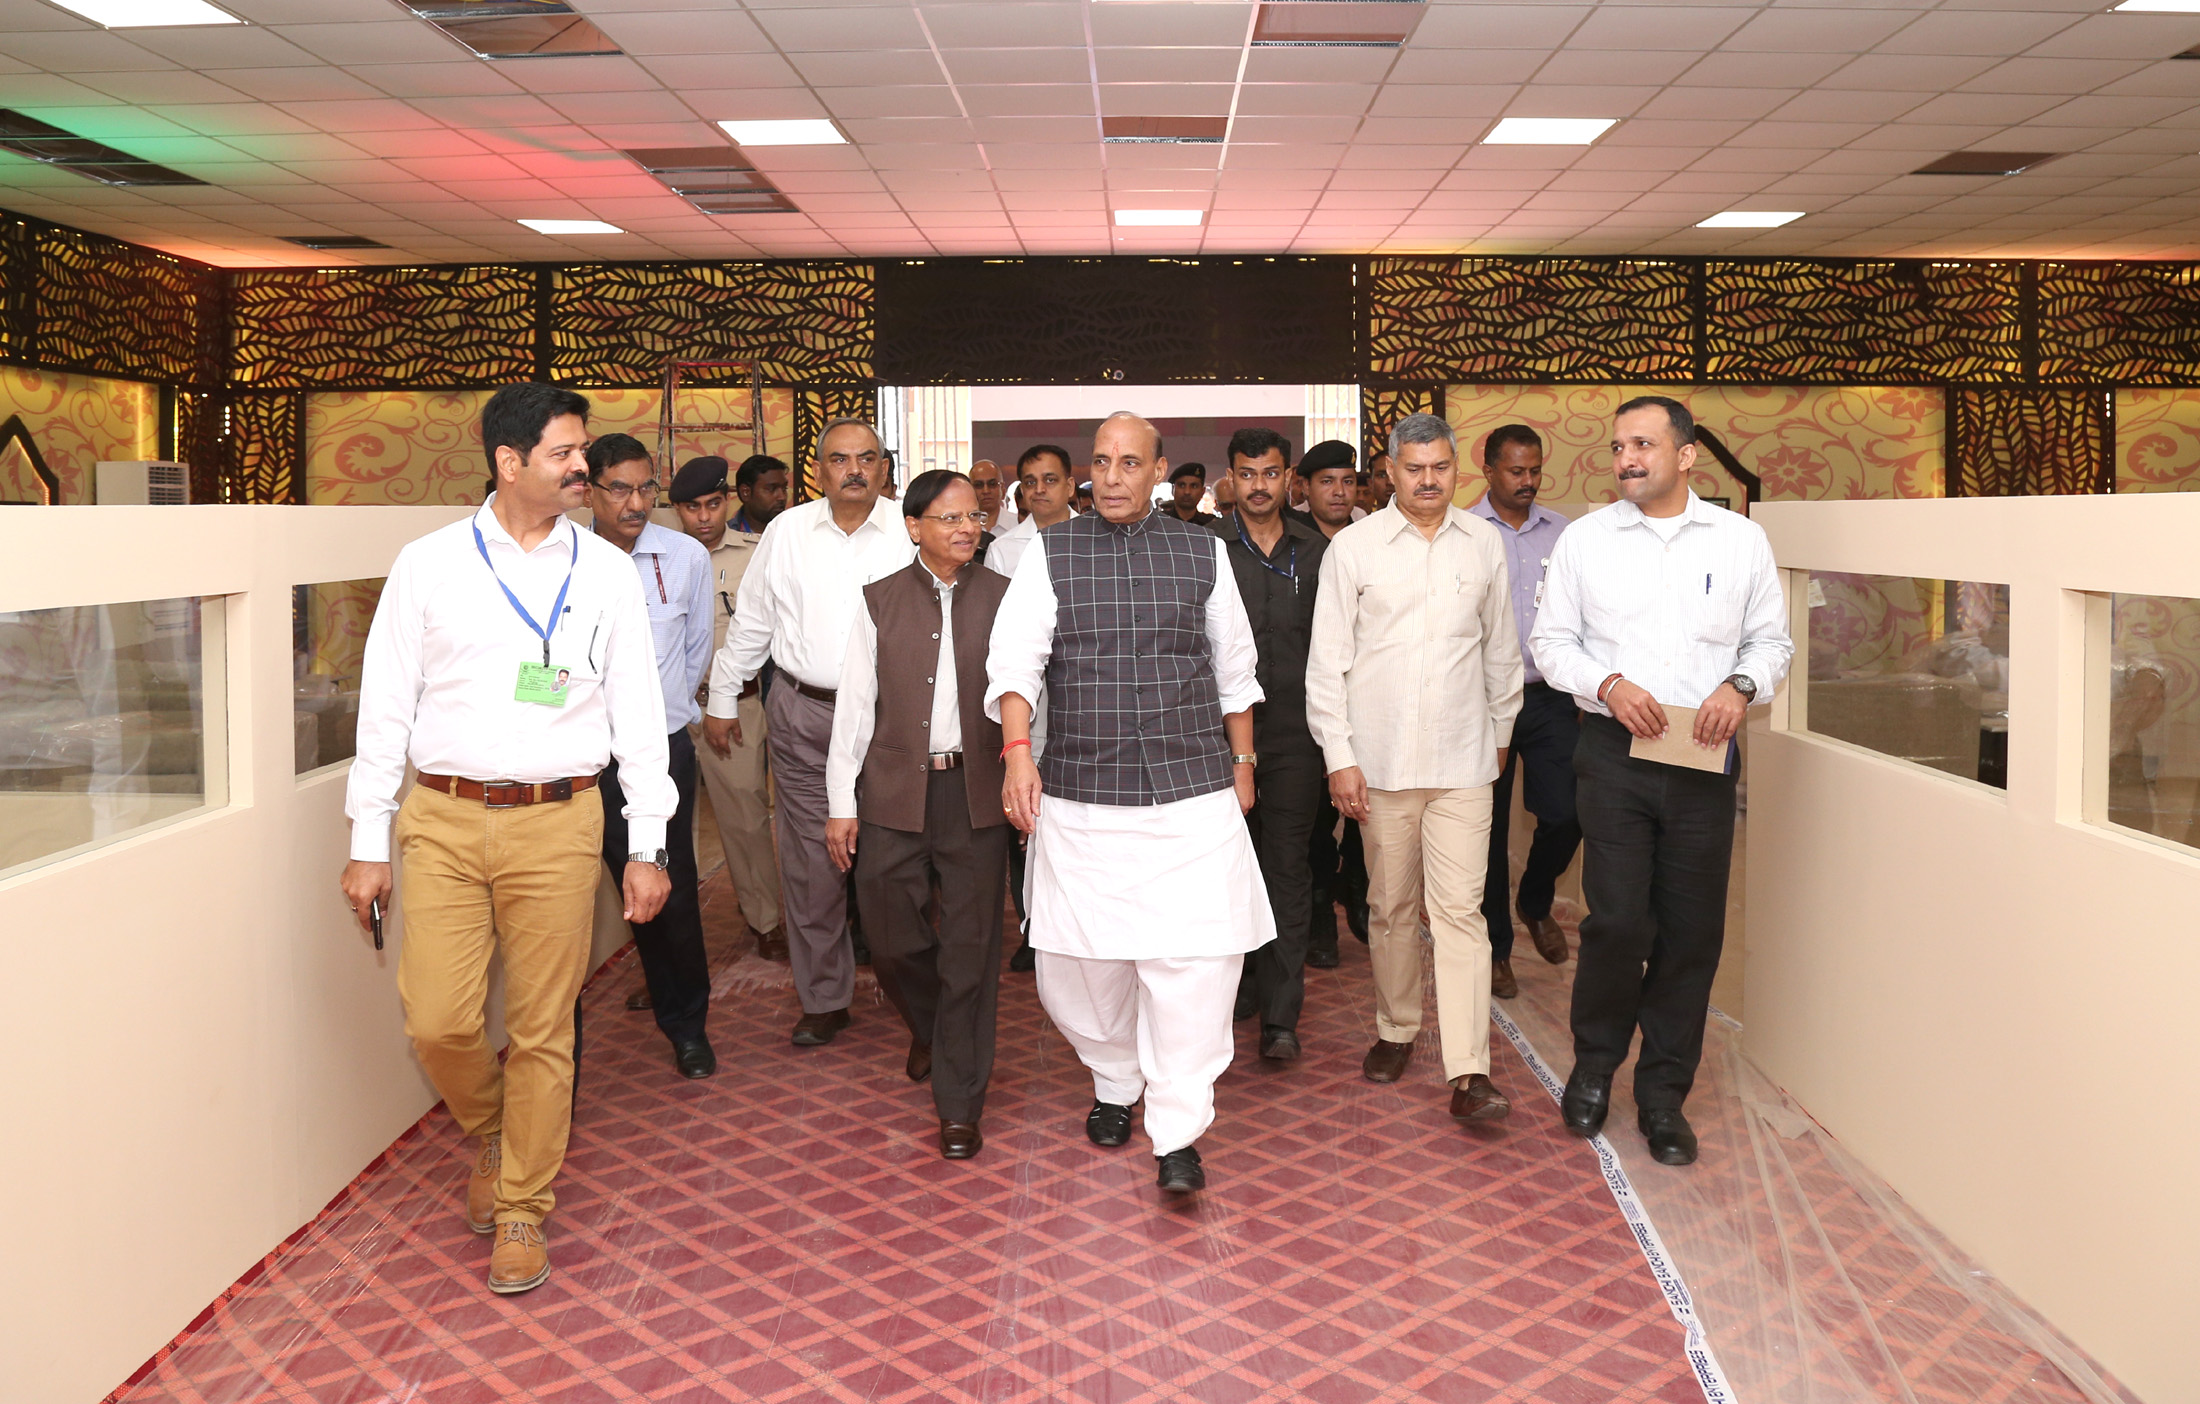 The Union Home Minister, Shri Rajnath Singh visiting the venue of Asian Ministerial Conference on Disaster Risk Reduction 2016, to inspect the preparedness for the upcoming conference, in New Delhi on November 01, 2016. 	The Additional Principal Secretary to the Prime Minister, Dr. P.K. Mishra, the Union Home Secretary, Shri Rajiv Mehrishi, the Member, NDMA, Shri R.K. Jain and other senior officers are also seen.